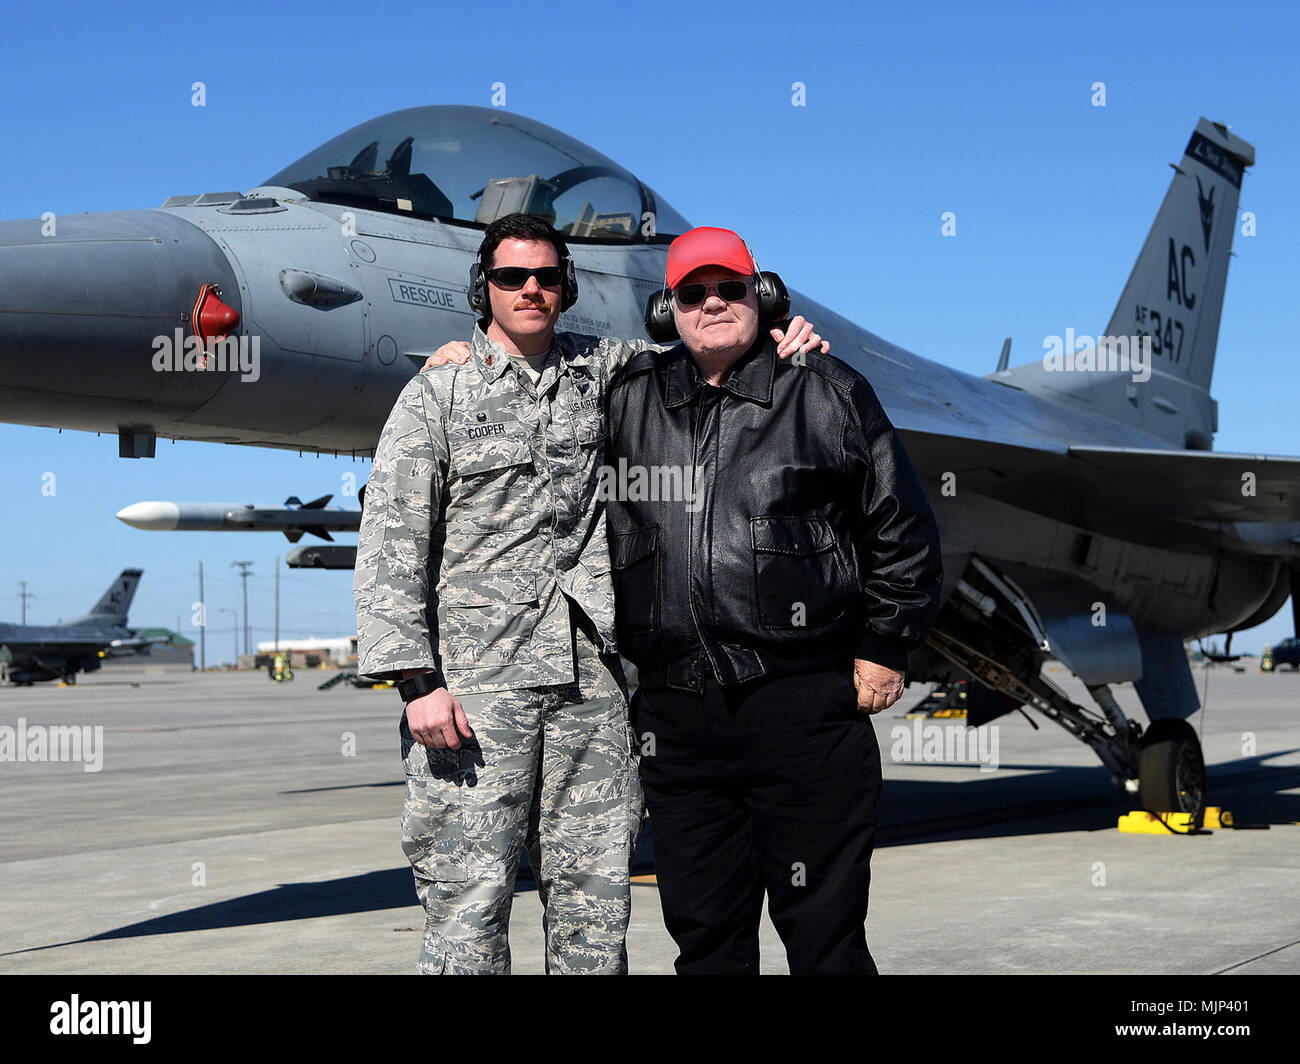 Maj. Brian T. Cooper, commander of the 177th Fighter Wing Aircraft Maintenance Squadron, New Jersey Air National Guard, and Thomas J. Cooper, a retired Air Force captain, pose for a photo in front on an F-16C Fighting Falcon at the Air Dominance Center in Savannah, Georgia, March 14, 2018. Brian commissioned in the U.S. Air Force in 2003, almost 40 years after his father Thomas, who commissioned in the Air Force in 1965. Armed Forces and civilians displaying courage bravery dedication commitment and sacrifice Stock Photo